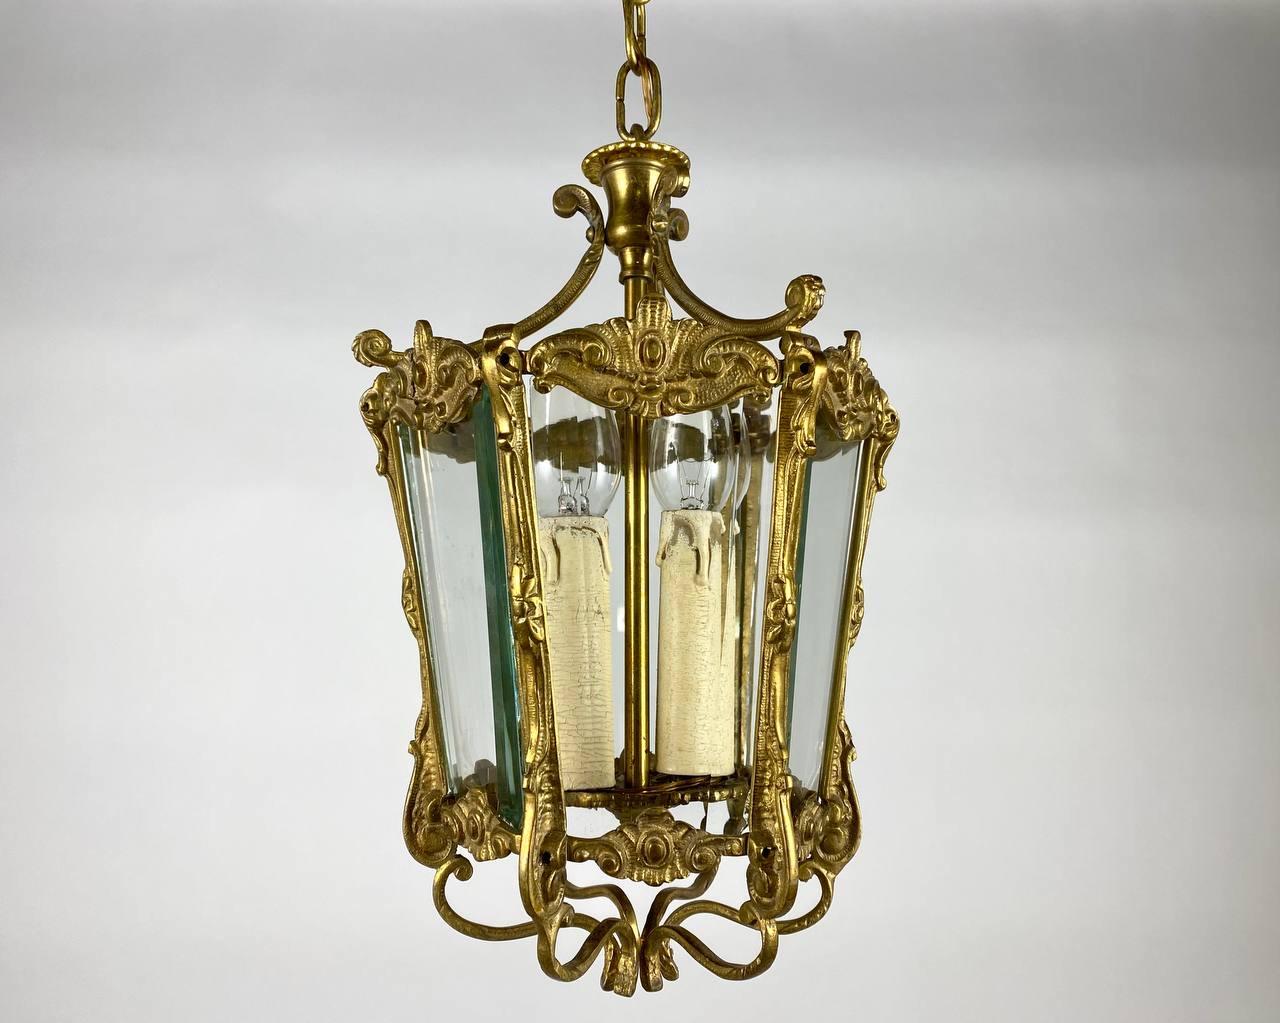 Rare Antique Ceiling Lantern in Gilt Bronze with Glass Panels, 1930s For Sale 2